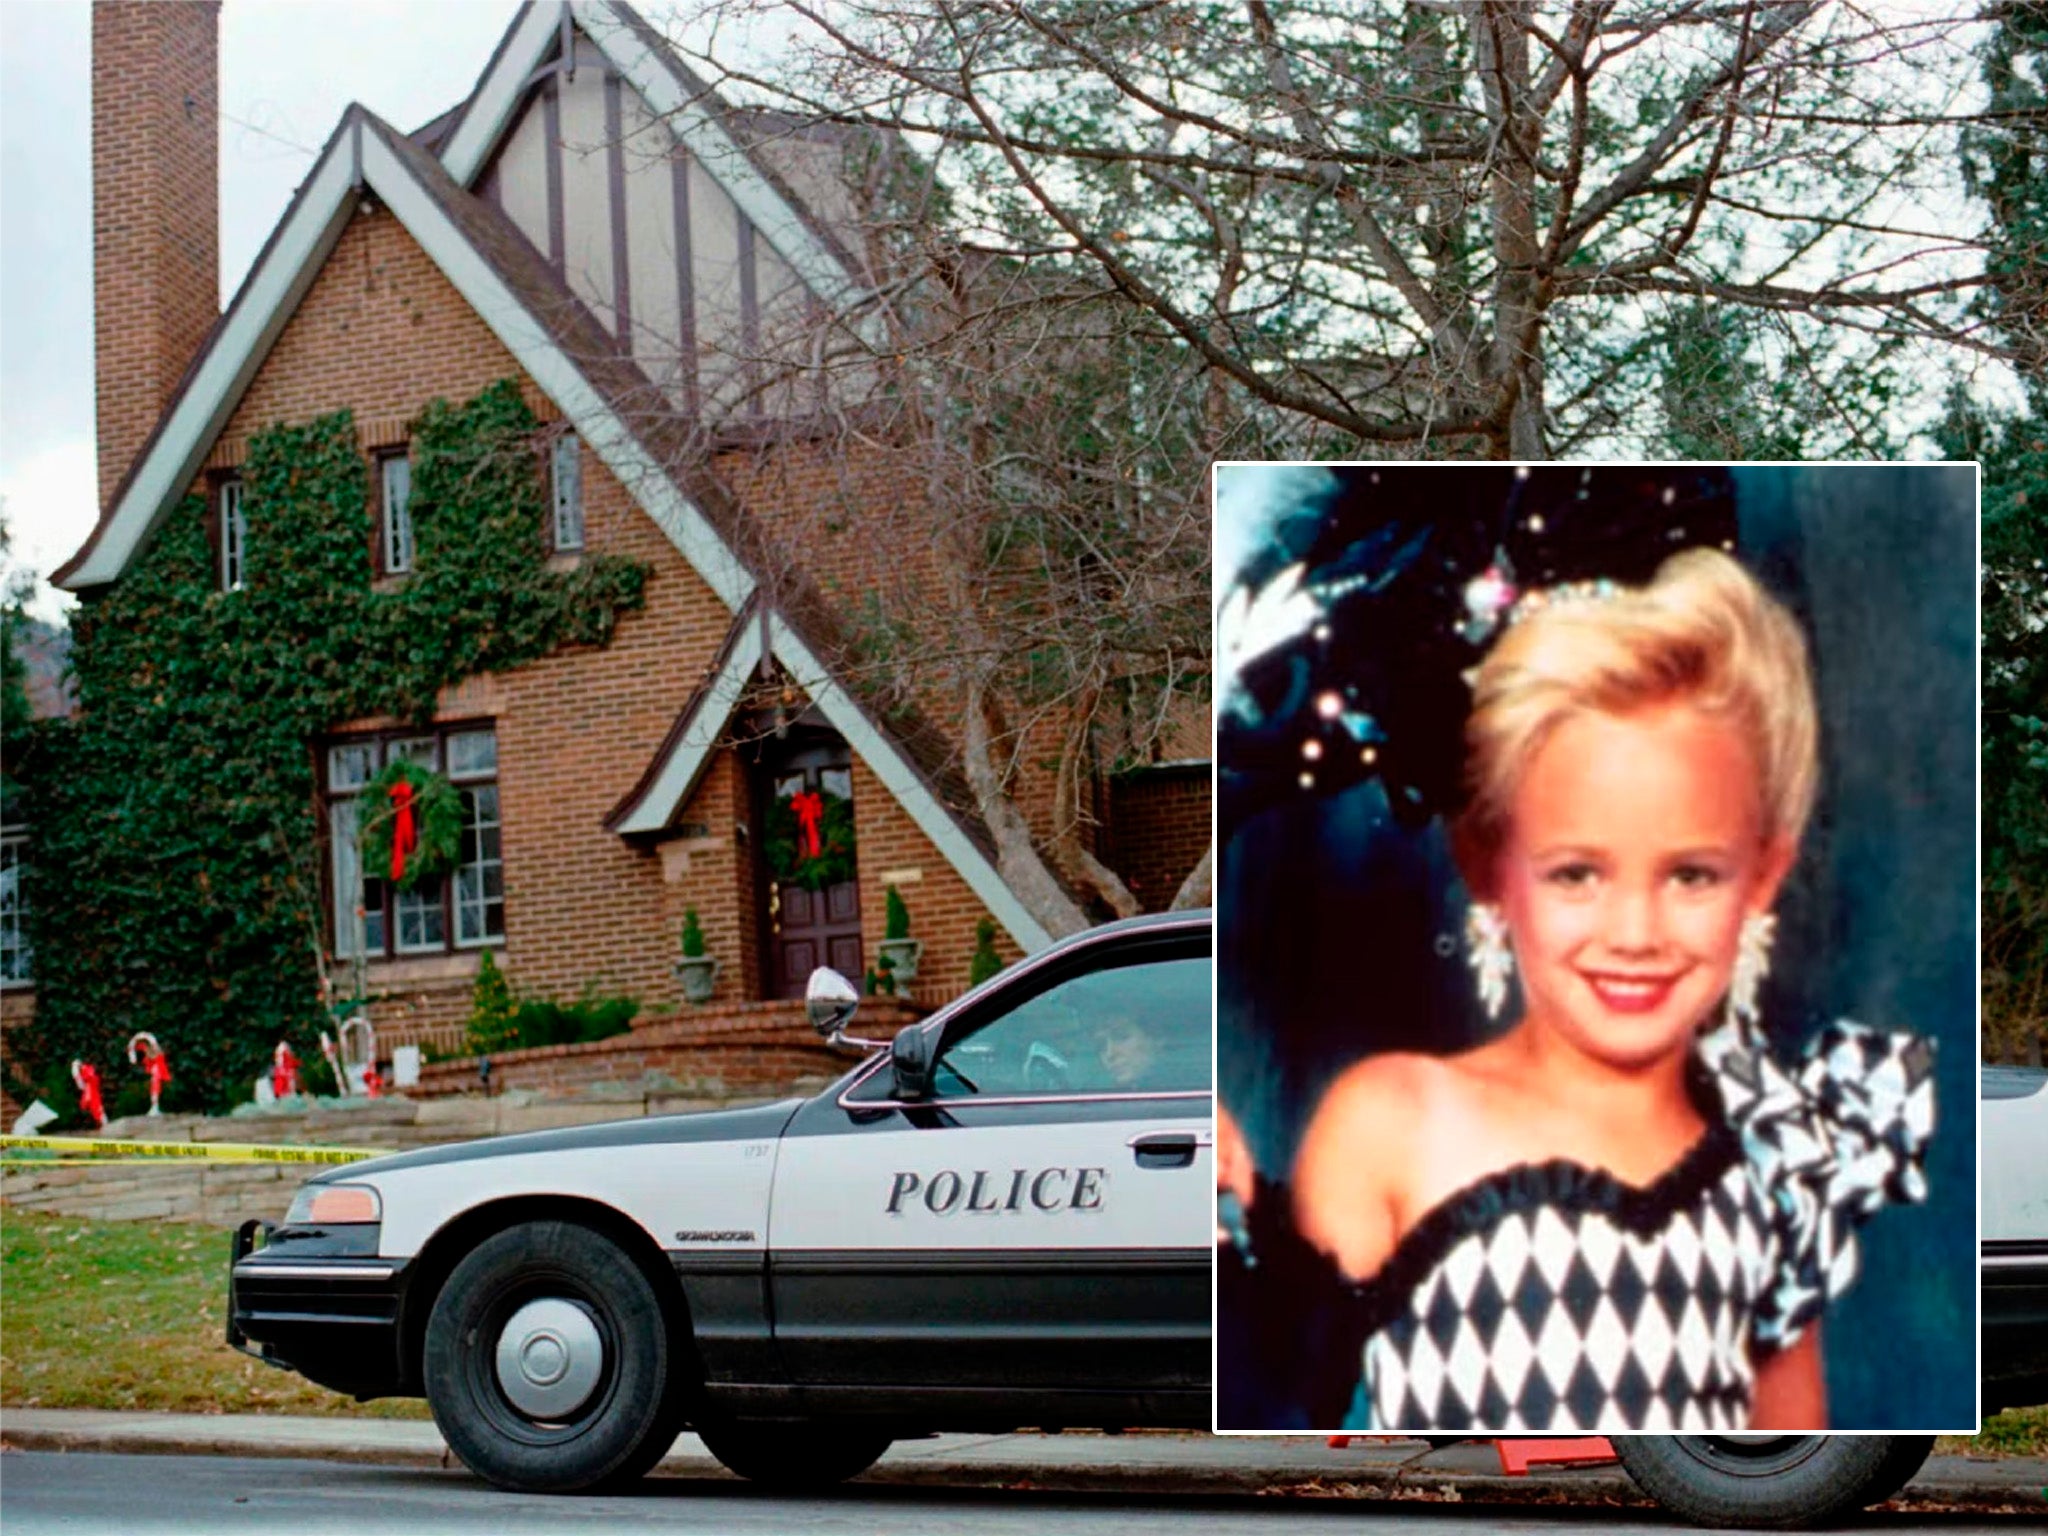 Officials looked at the investigation into the December 1996 death of six-year-old JonBenet Ramsey